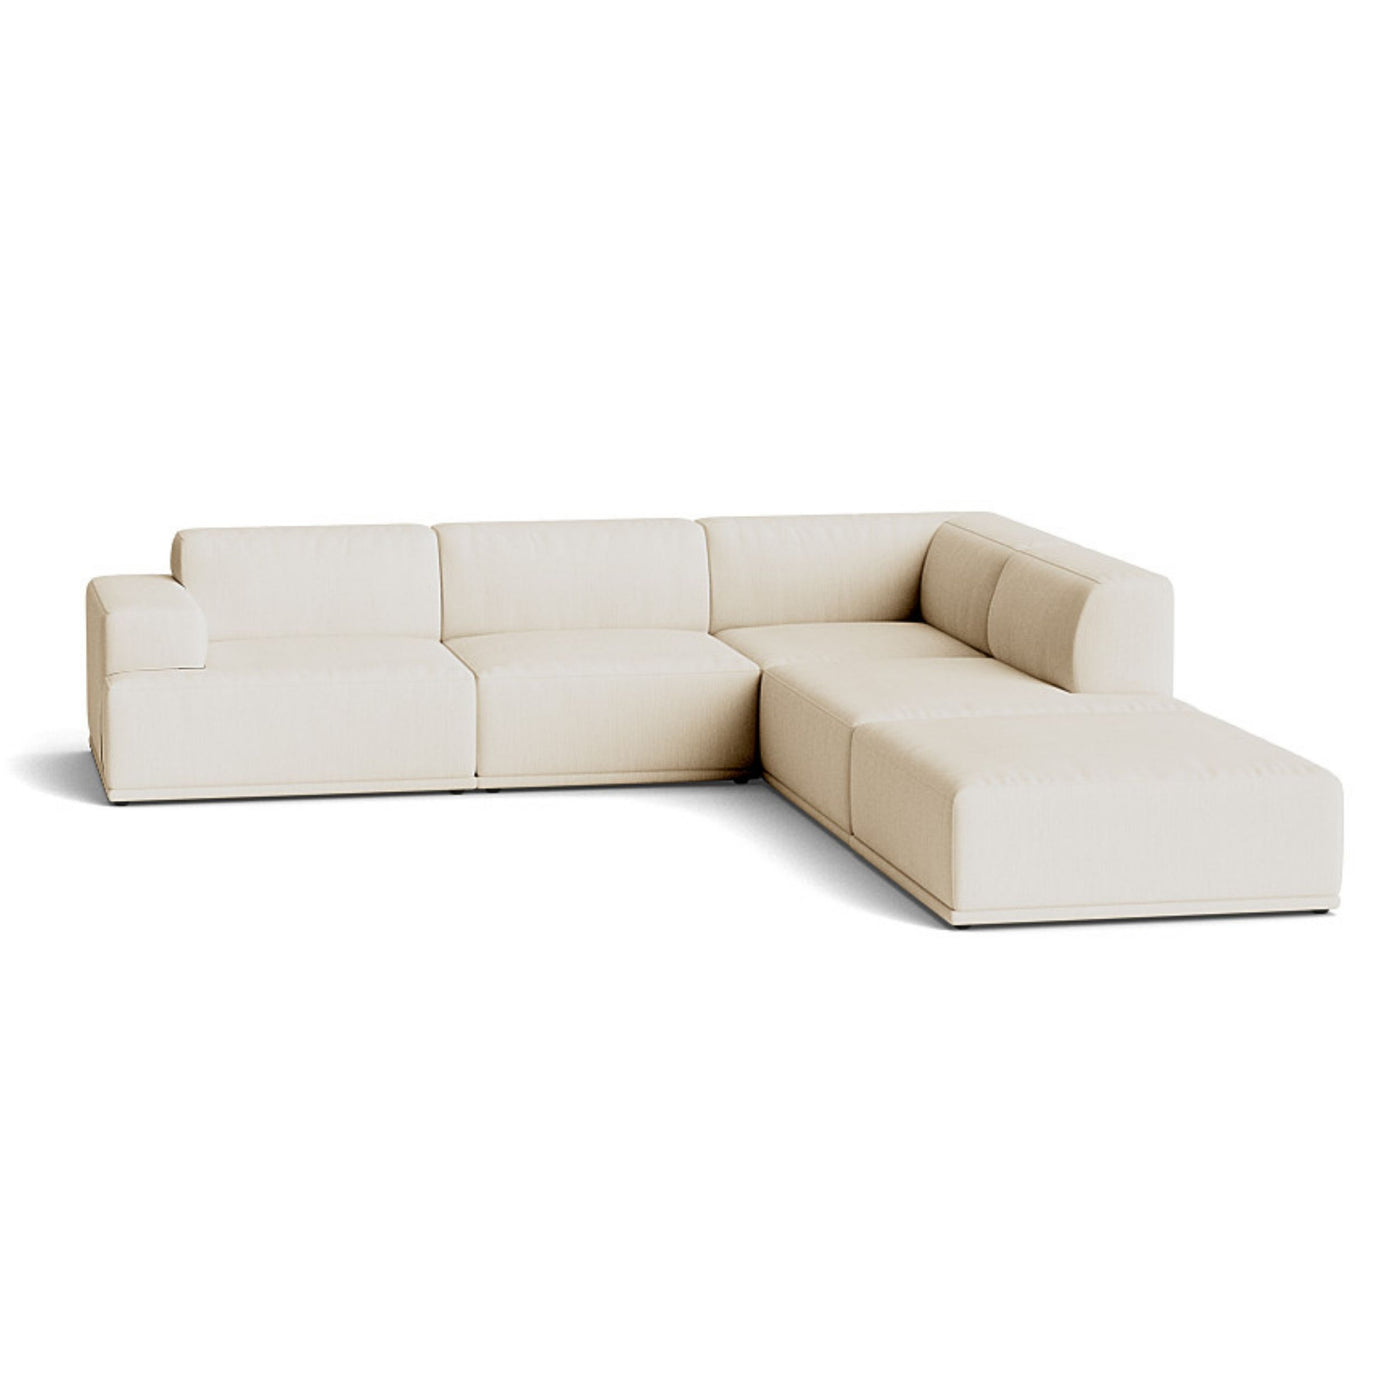 Muuto Connect Soft Modular Corner Sofa, configuration 2. Made-to-order from someday designs. #colour_balder-212